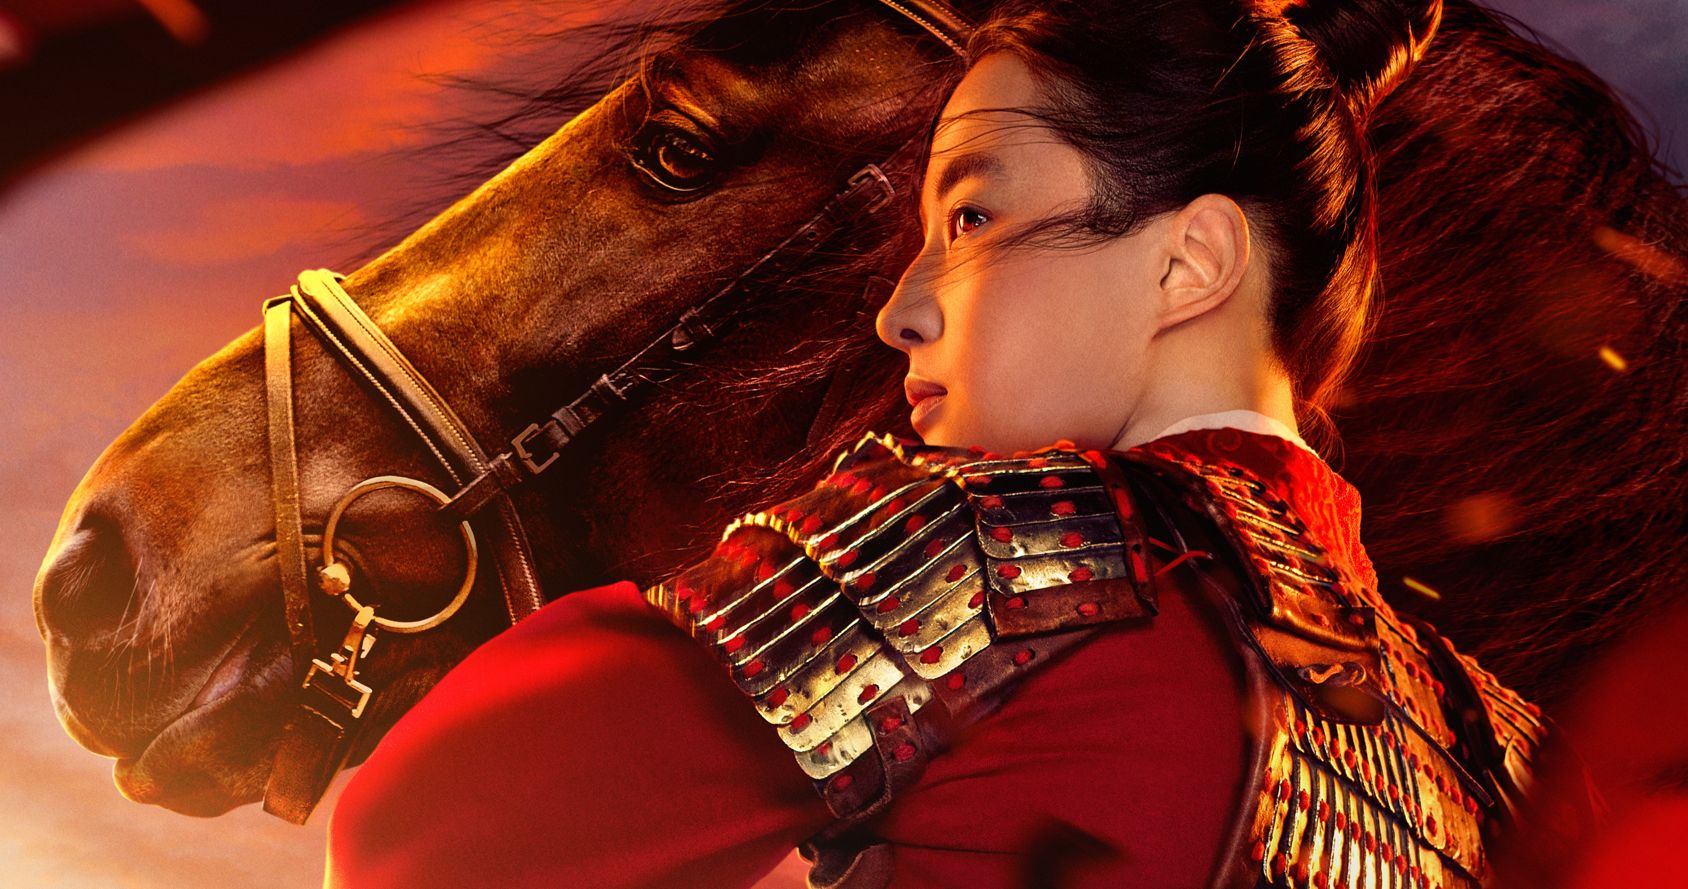 Mulan 4DX Poster Pays Tribute to the Original Disney Classic [Exclusive]